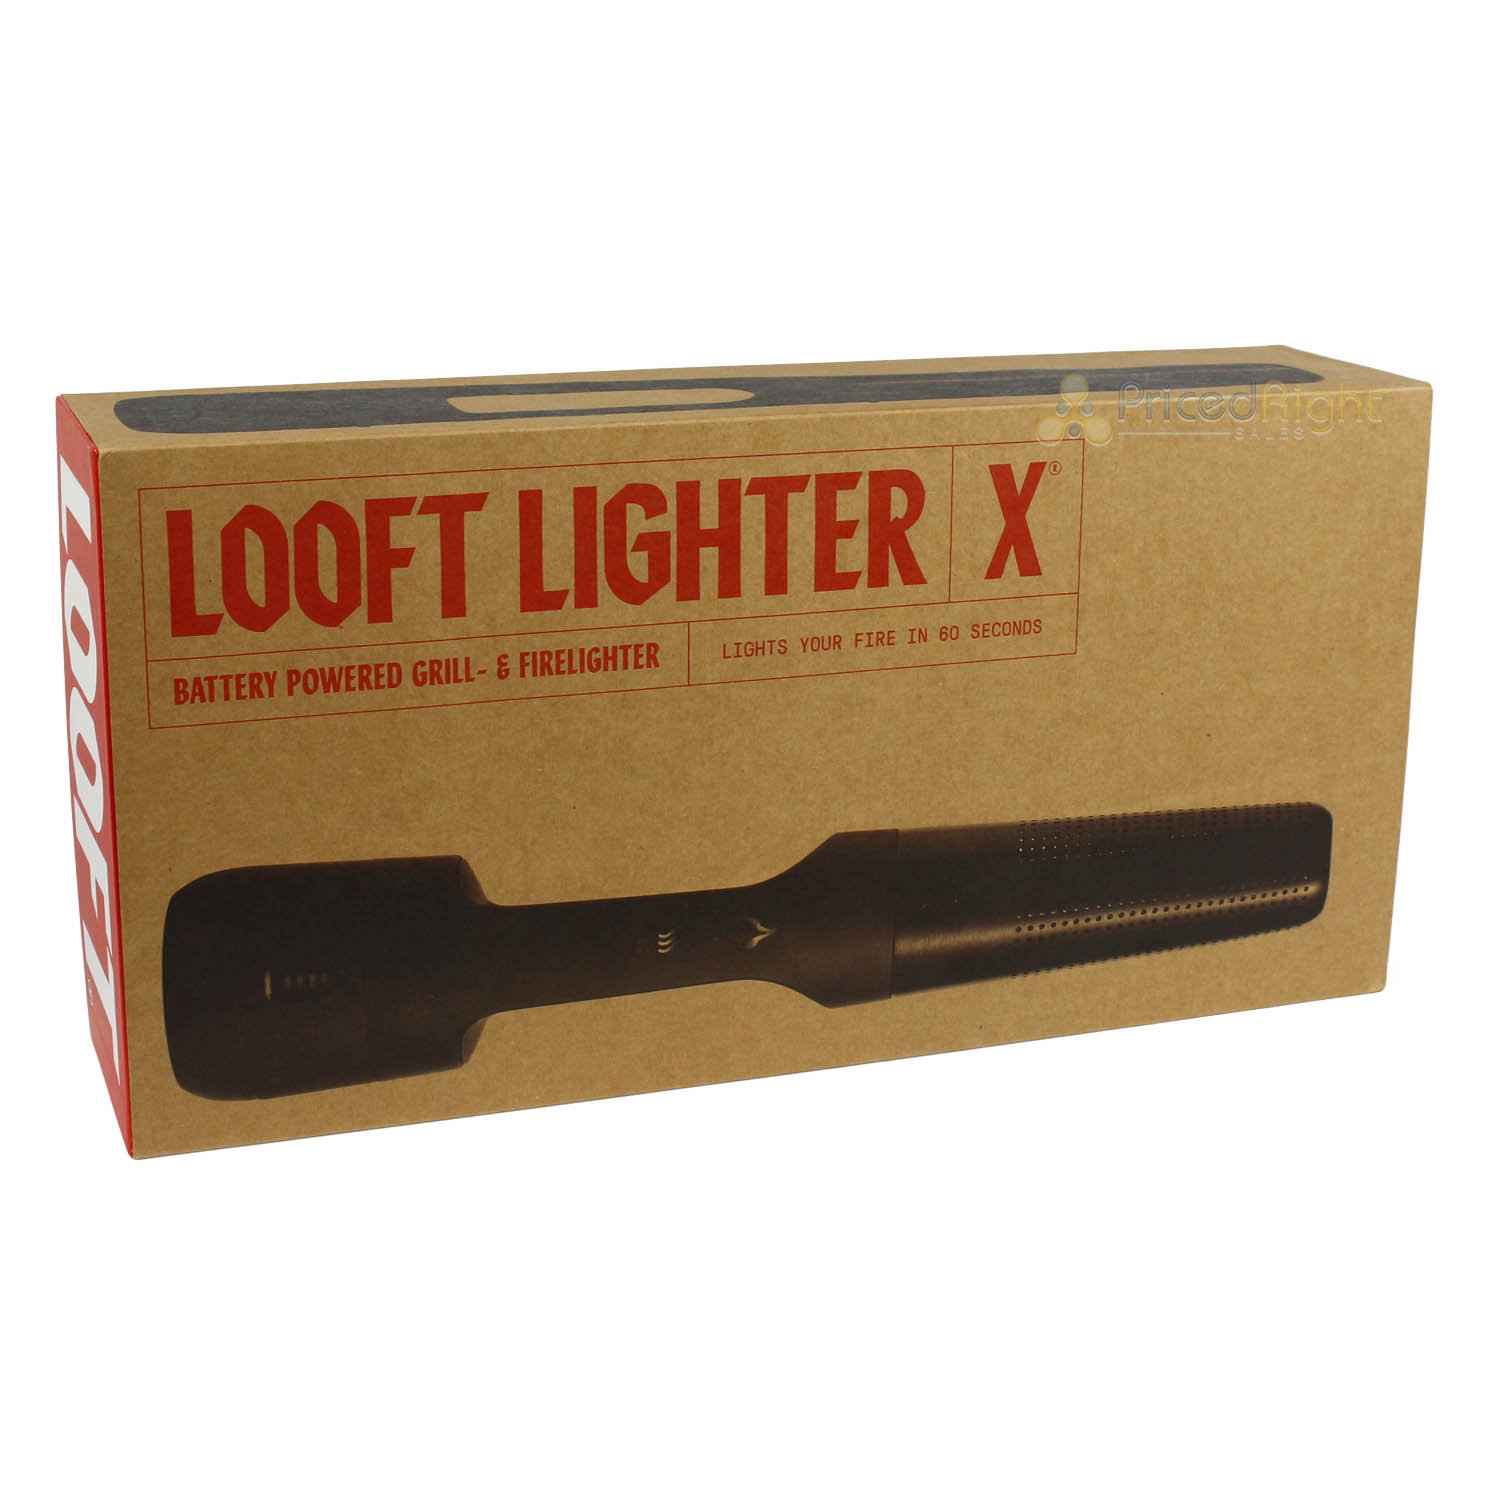 Looft Lighter X Battery Powered Cordless Grill and Firelighter Heated Air 1200°F